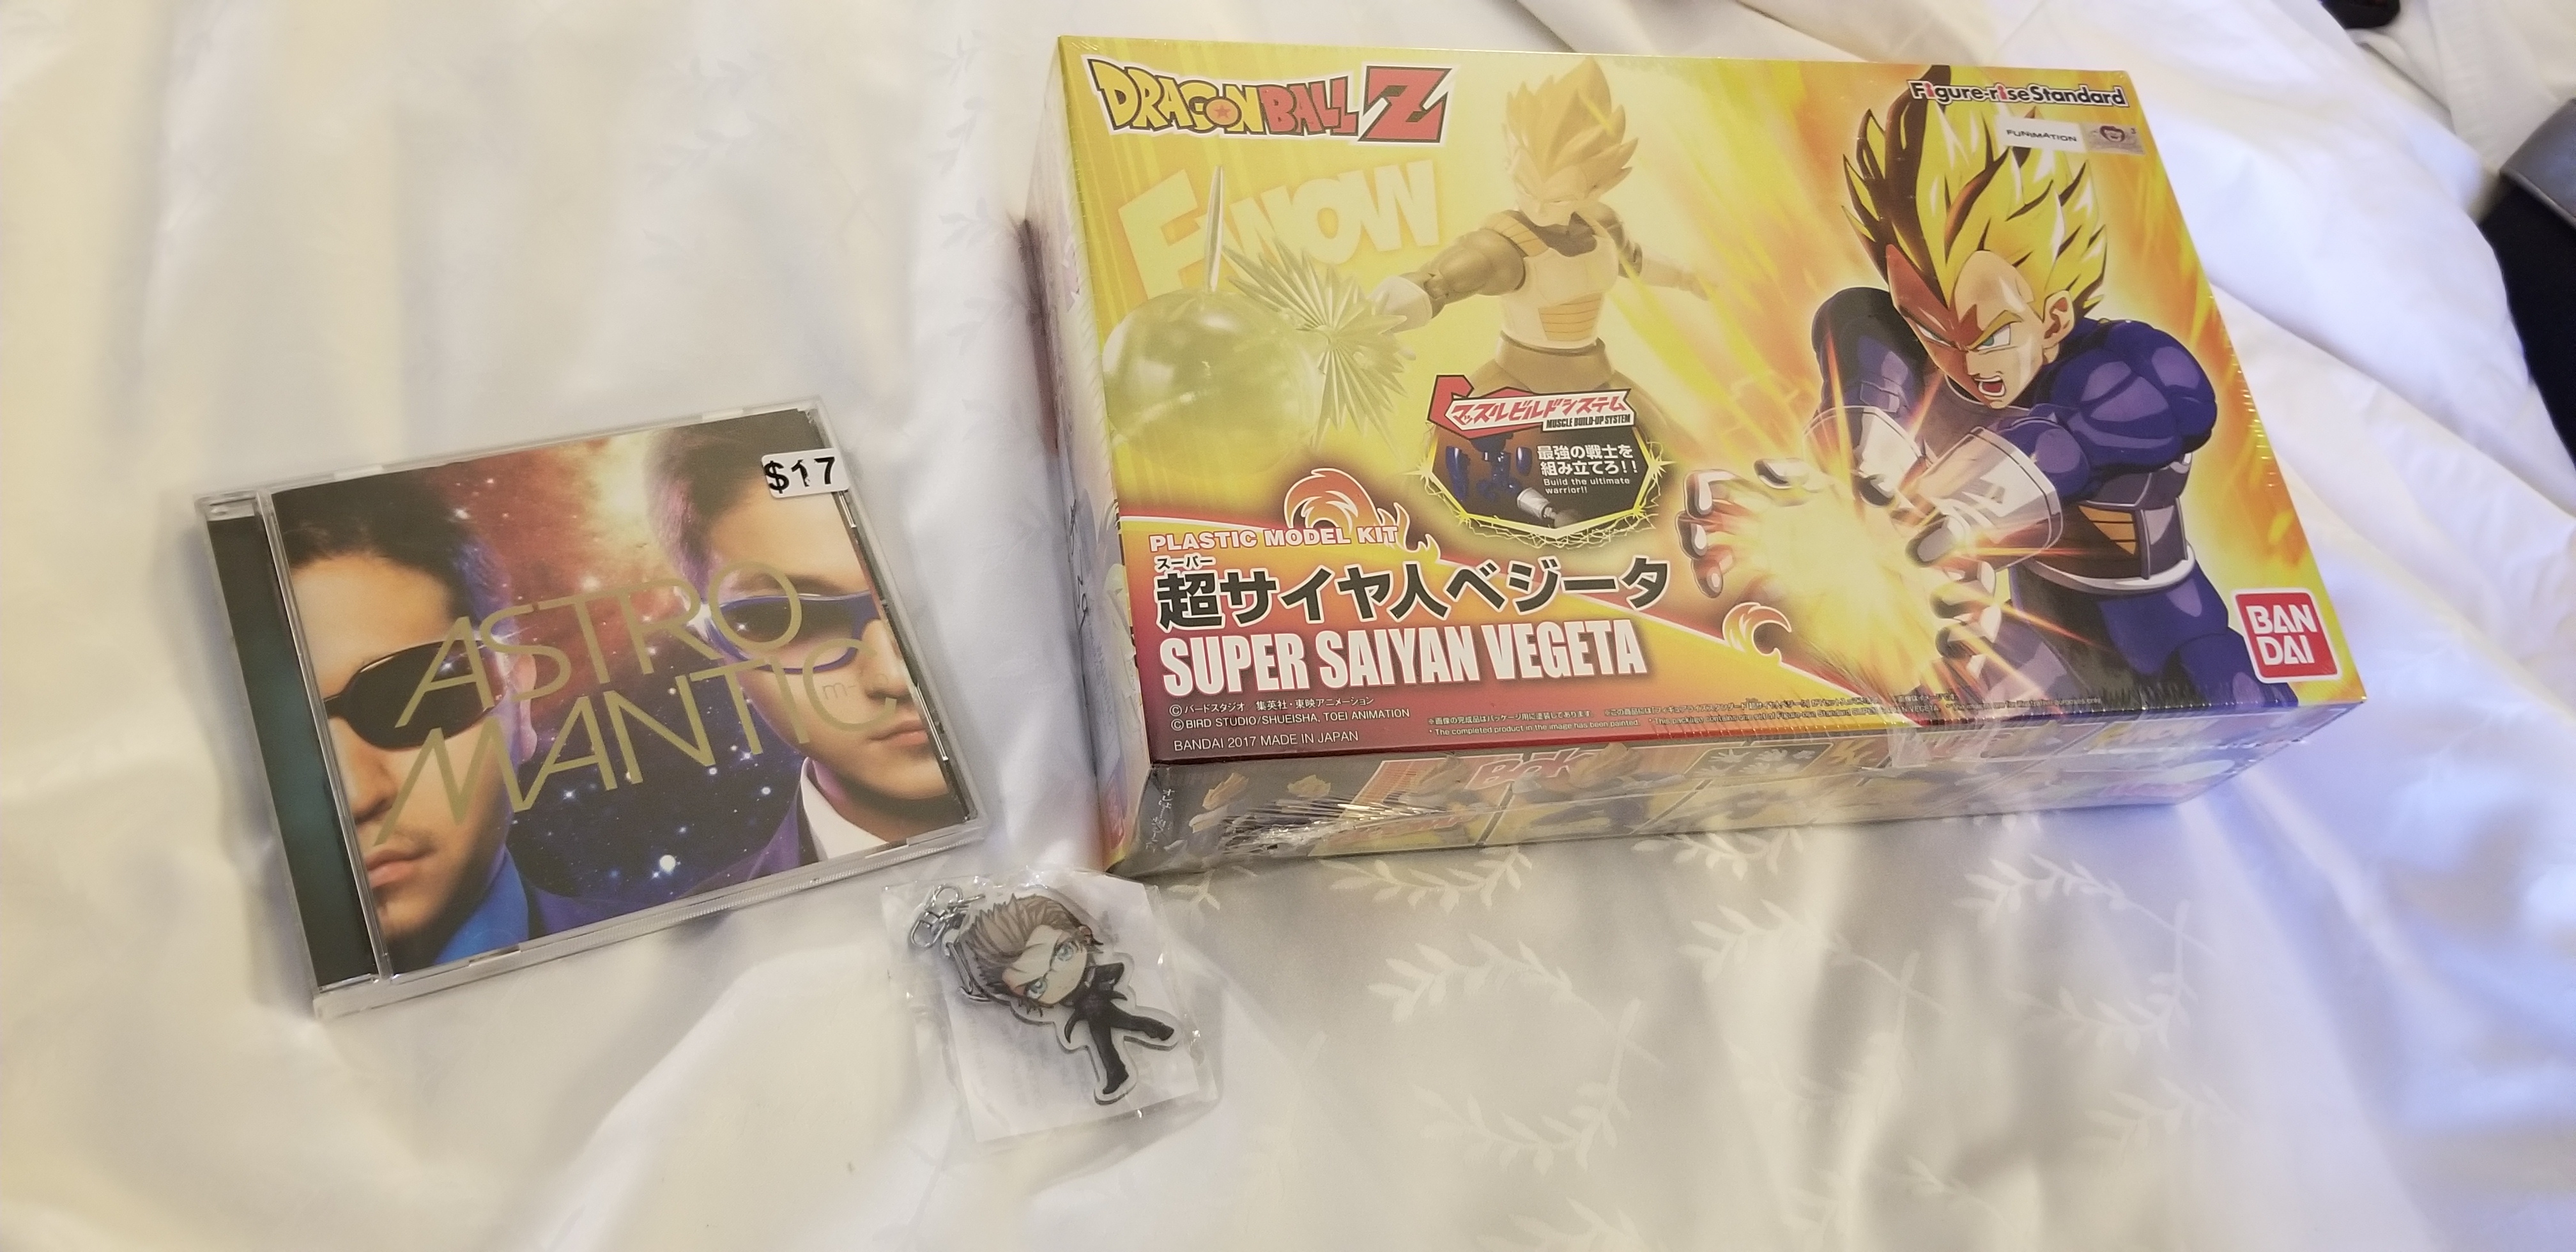 You are currently viewing Interesting Find: Anime Weekend Atlanta Swag – Part 1